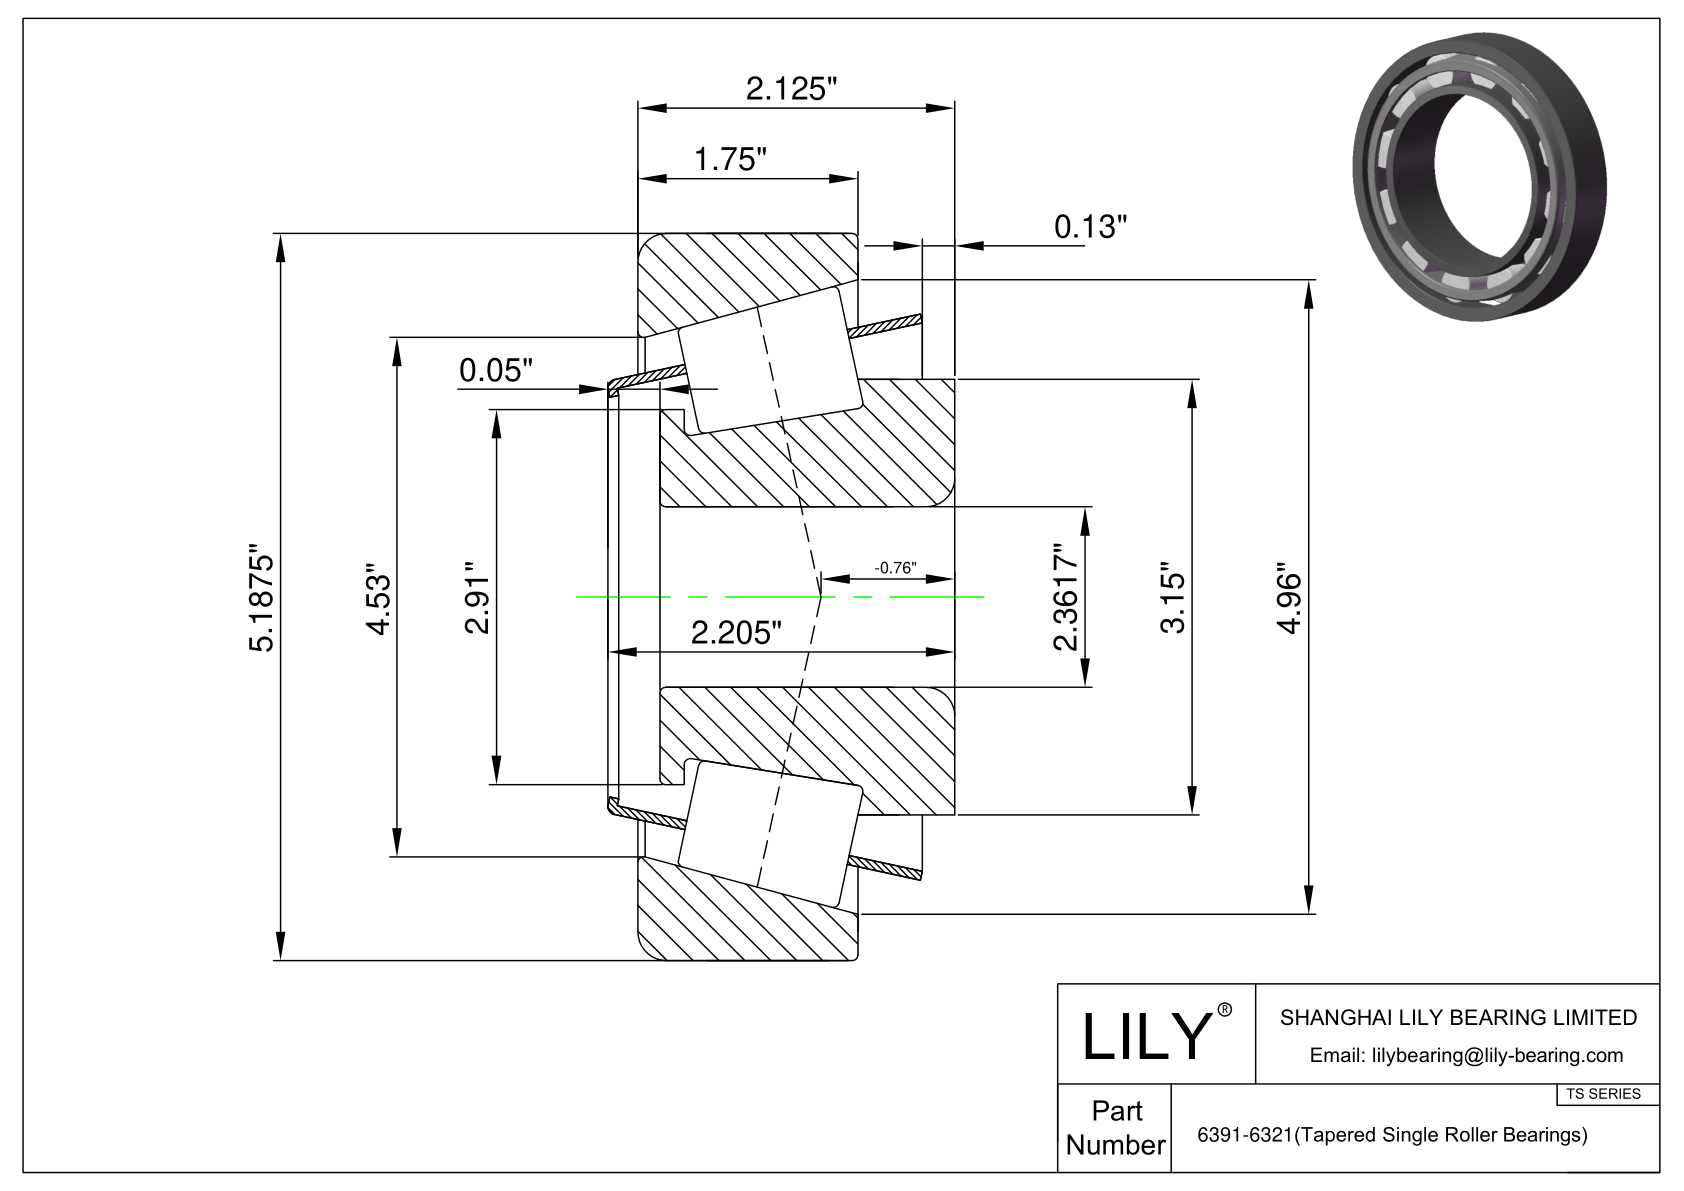 6391-6321 TS (Tapered Single Roller Bearings) (Imperial) cad drawing